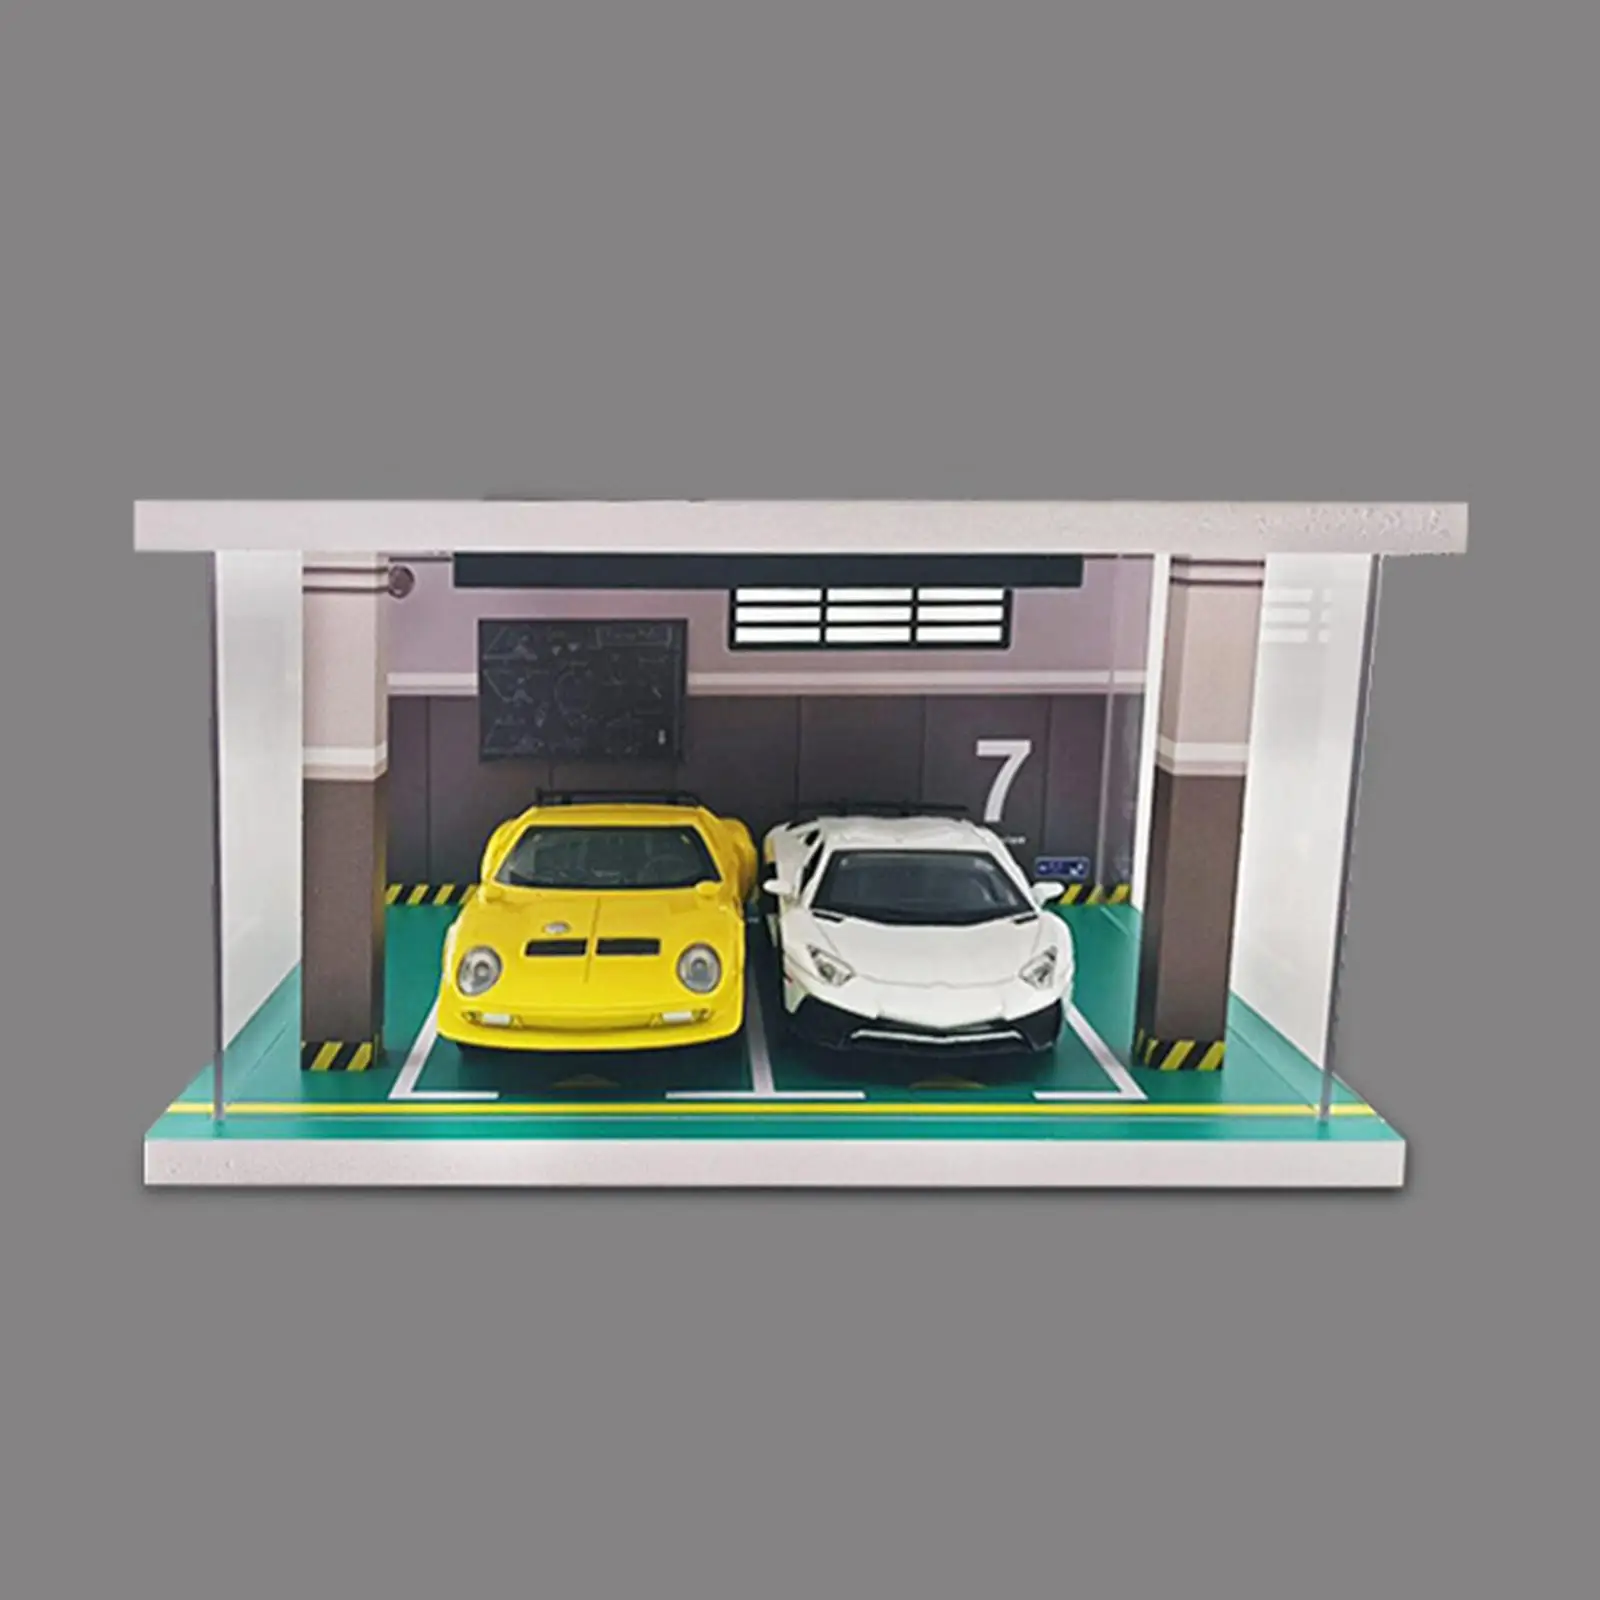 1:32 Scale LED Lighting Garage Model Layout Acrylic Display Case Mini Car Garage for Display Car Home Tabletop Office Decoration